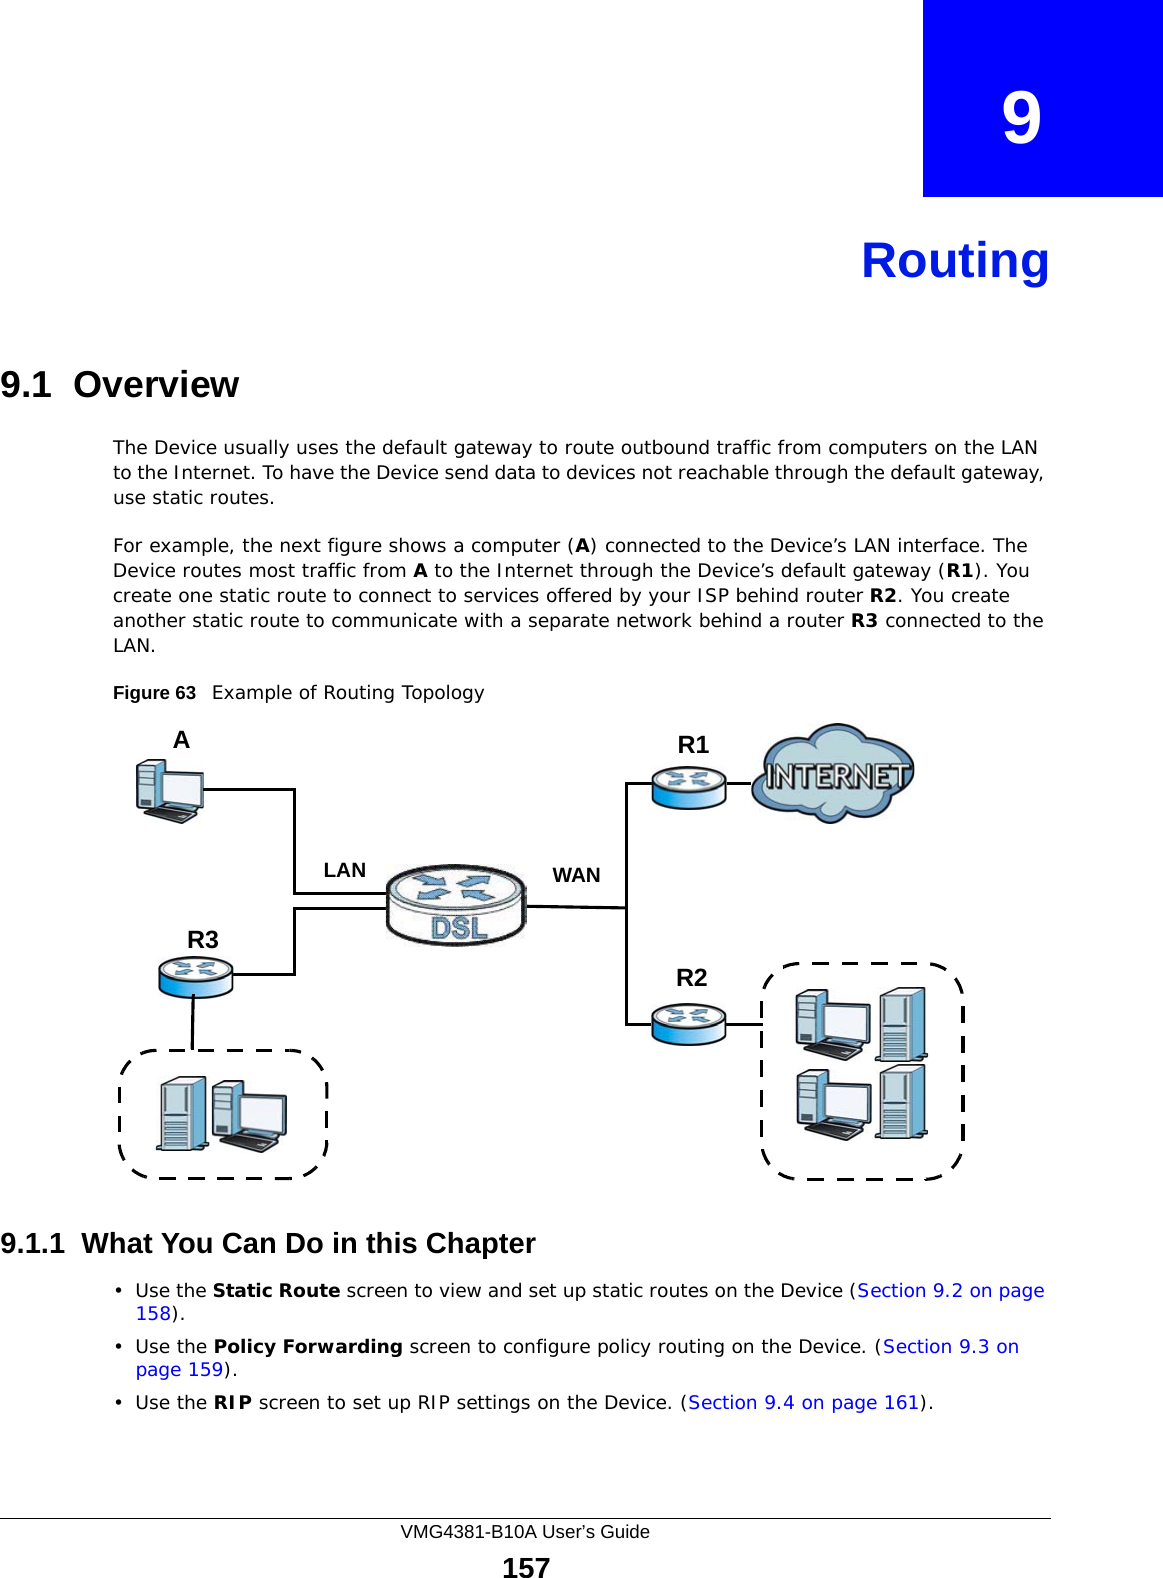 VMG4381-B10A User’s Guide157CHAPTER   9Routing9.1  Overview The Device usually uses the default gateway to route outbound traffic from computers on the LAN to the Internet. To have the Device send data to devices not reachable through the default gateway, use static routes.For example, the next figure shows a computer (A) connected to the Device’s LAN interface. The Device routes most traffic from A to the Internet through the Device’s default gateway (R1). You create one static route to connect to services offered by your ISP behind router R2. You create another static route to communicate with a separate network behind a router R3 connected to the LAN.   Figure 63   Example of Routing Topology9.1.1  What You Can Do in this Chapter•Use the Static Route screen to view and set up static routes on the Device (Section 9.2 on page 158).•Use the Policy Forwarding screen to configure policy routing on the Device. (Section 9.3 on page 159). •Use the RIP screen to set up RIP settings on the Device. (Section 9.4 on page 161).WANR1R2AR3LAN